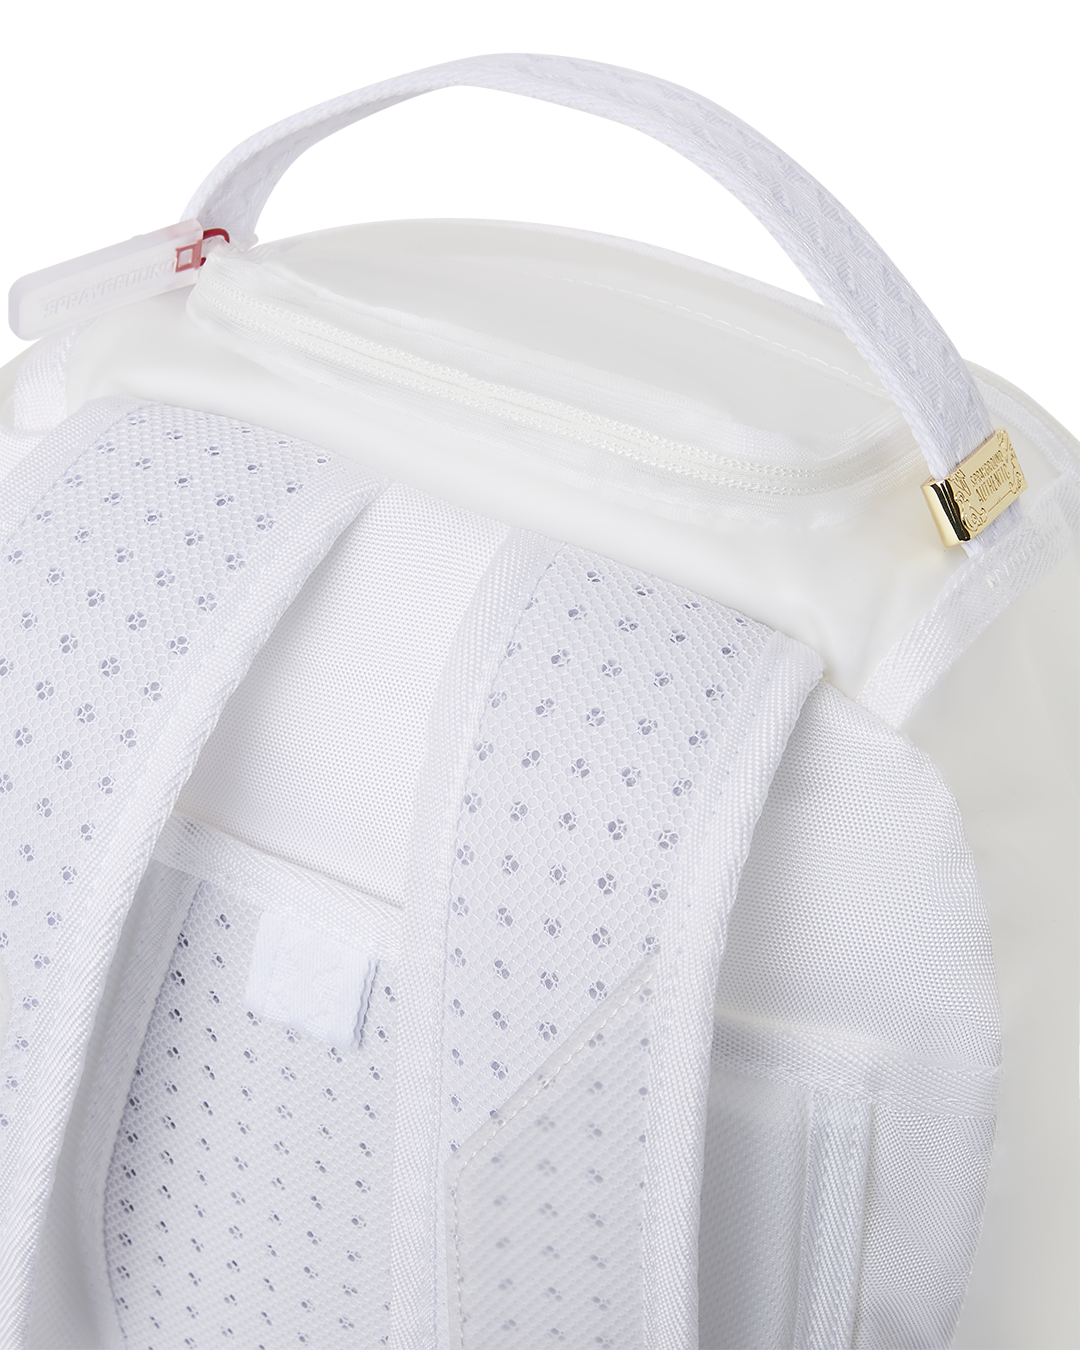 CASPER FROSTED DLX BACKPACK